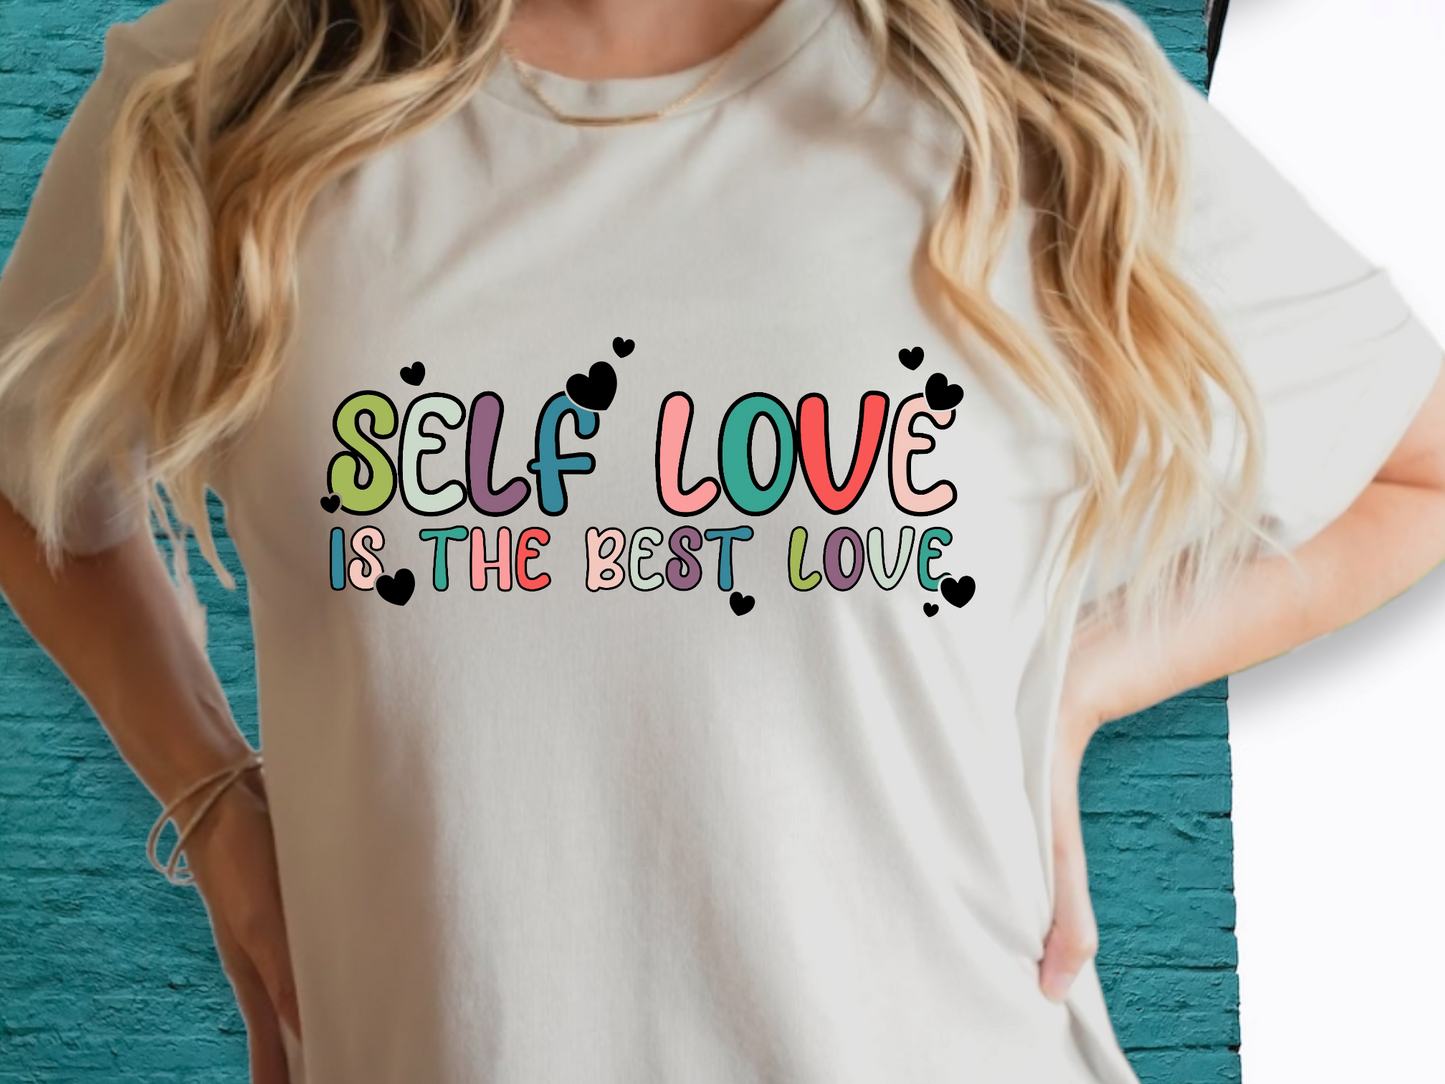 SELF LOVE IS THE BEST LOVE